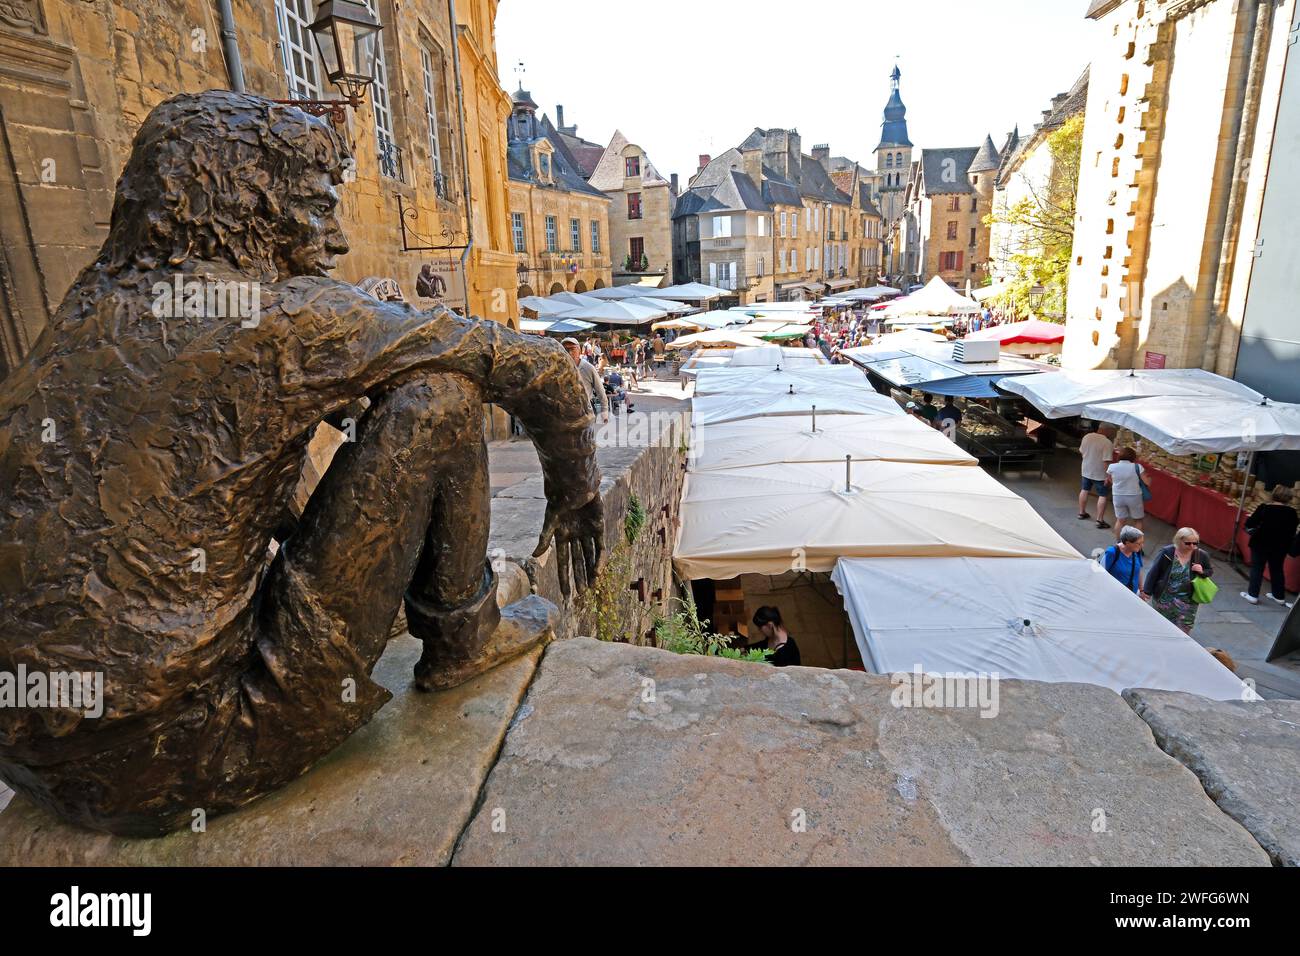 The Badaud statue of a man observing the Saturday morning market in Sarlat France Stock Photo